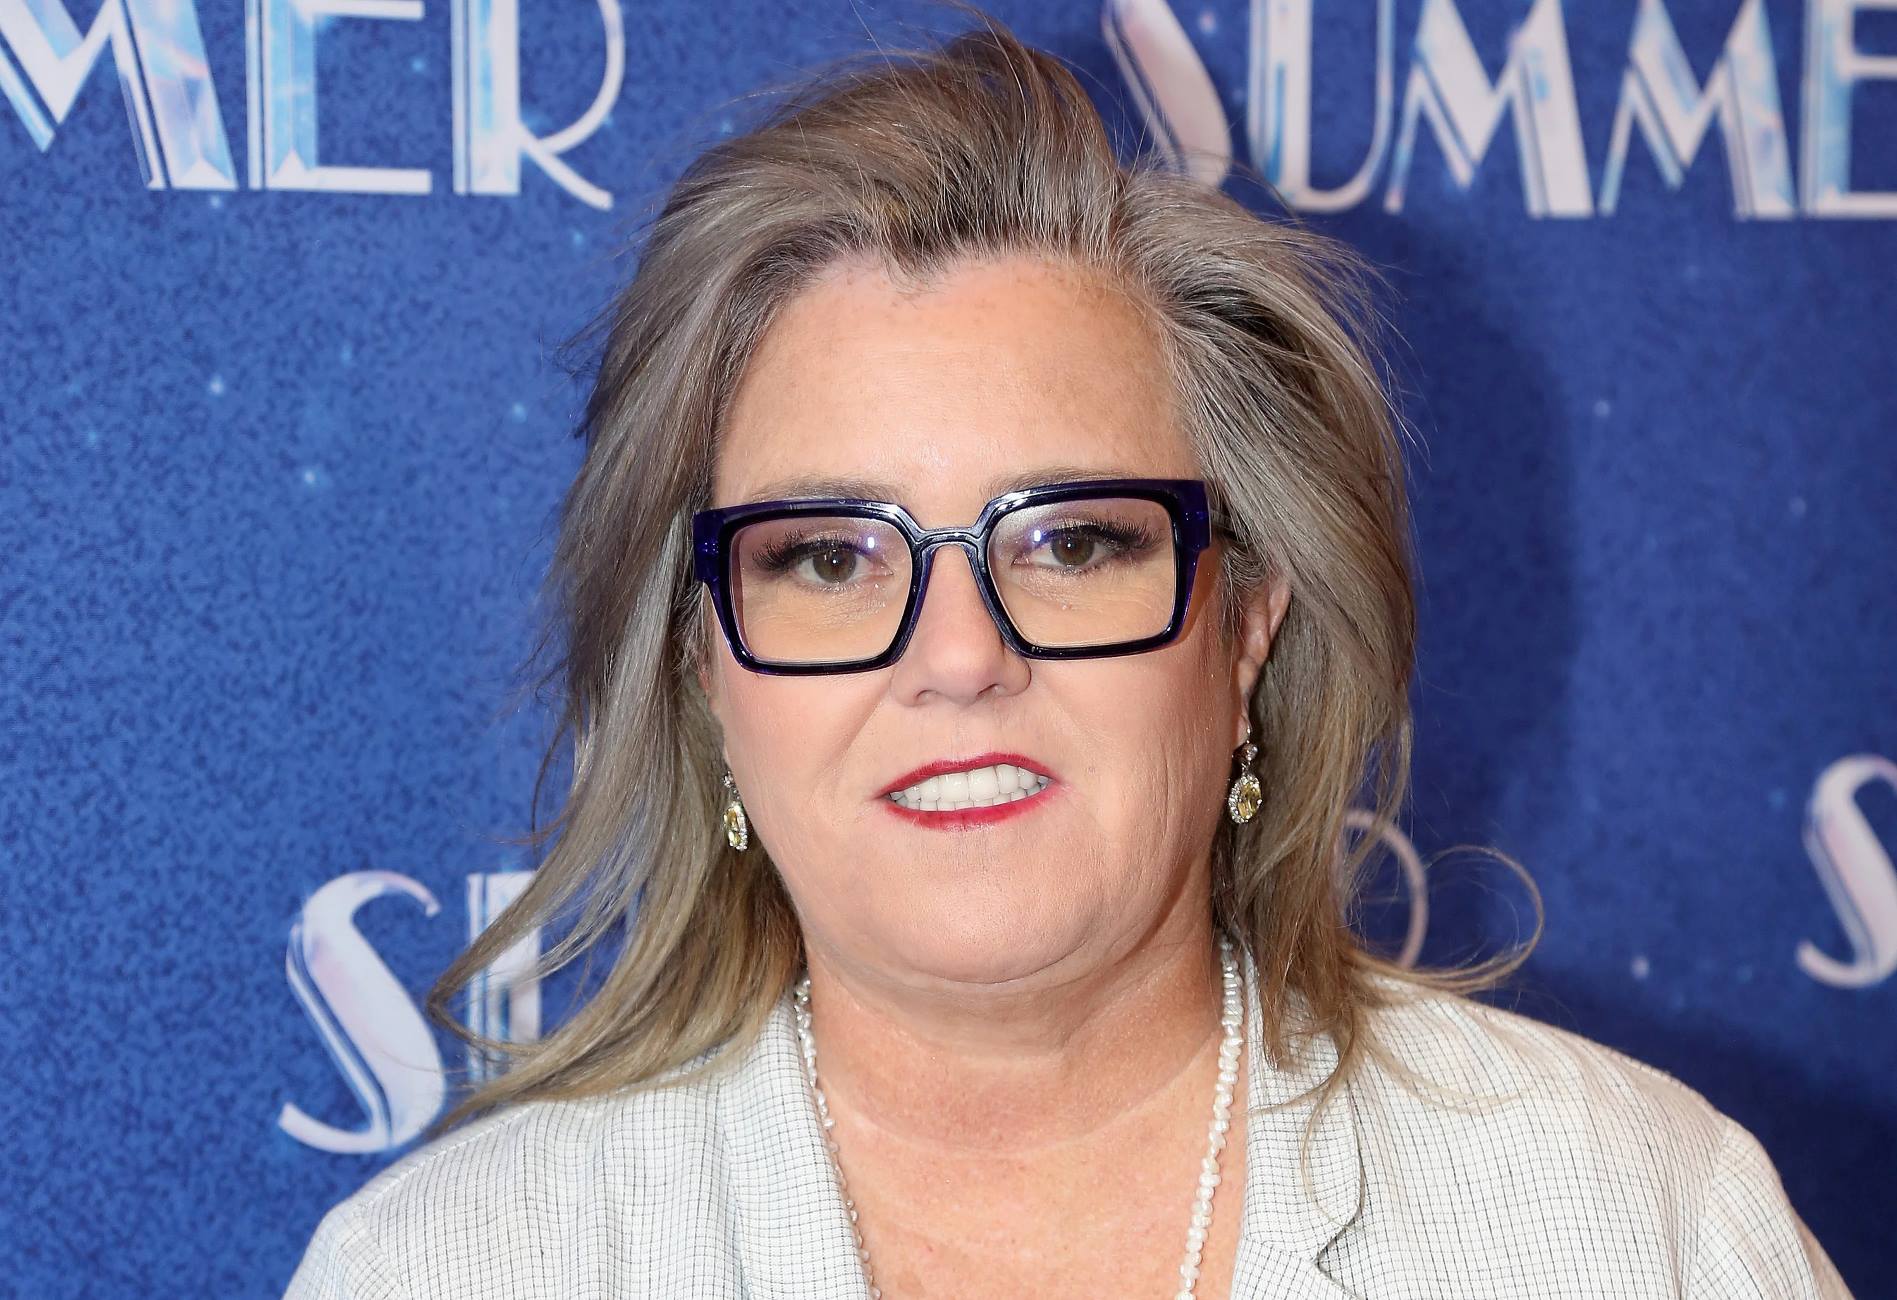 rosie-odonnell-expresses-frustration-as-drew-barrymore-resumes-talk-show-during-writers-strike